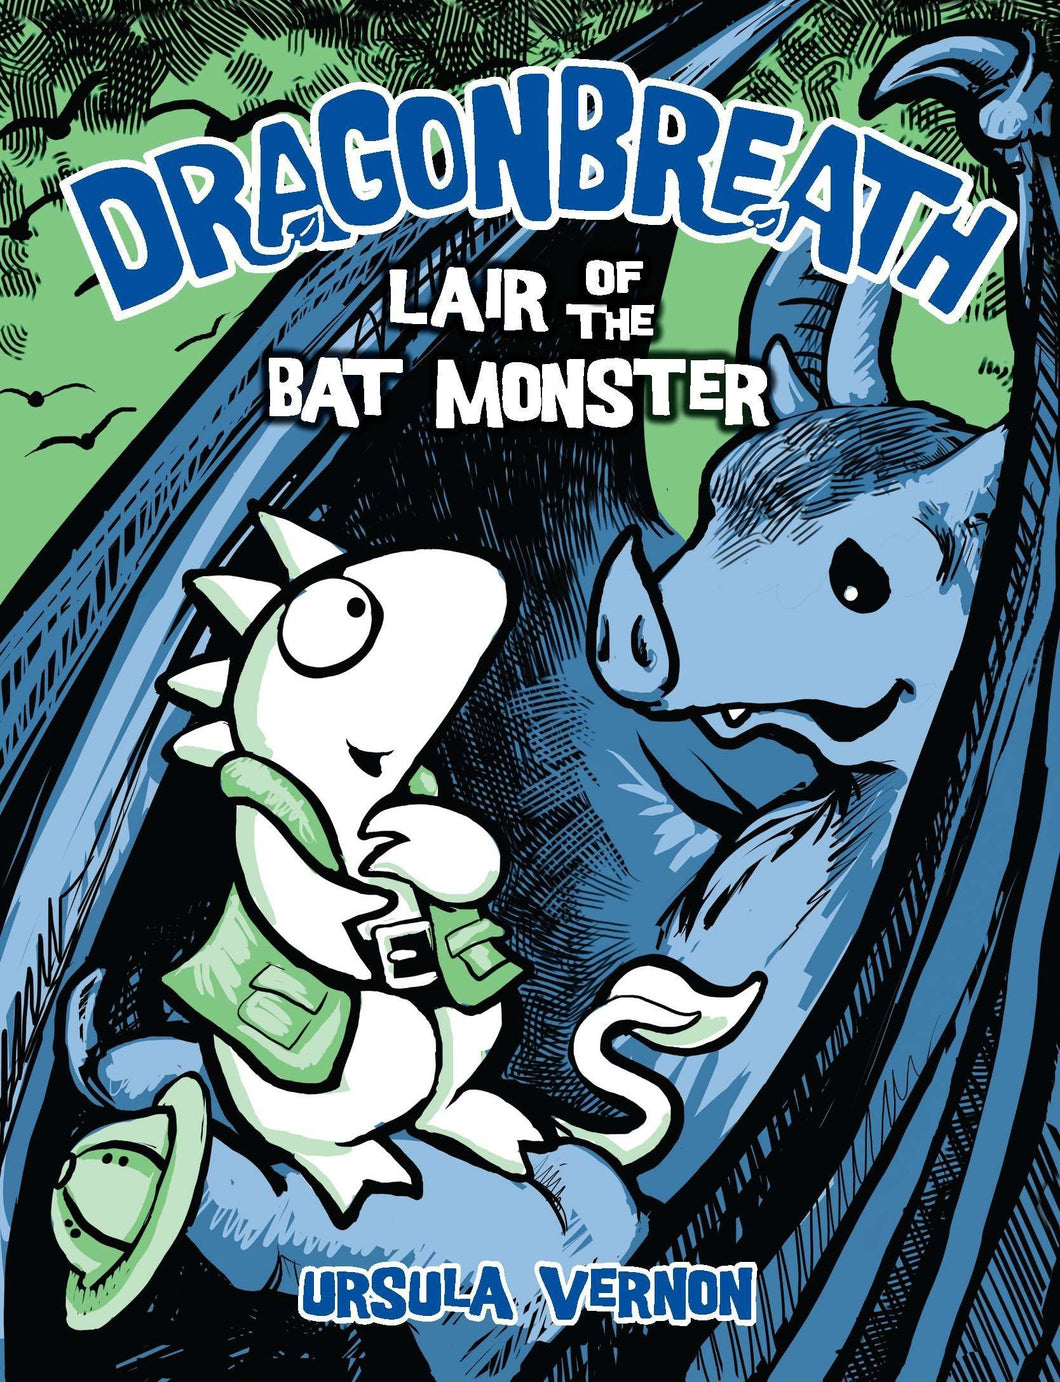 Lair of the Bat Monster (Dragonbreath Book 4)